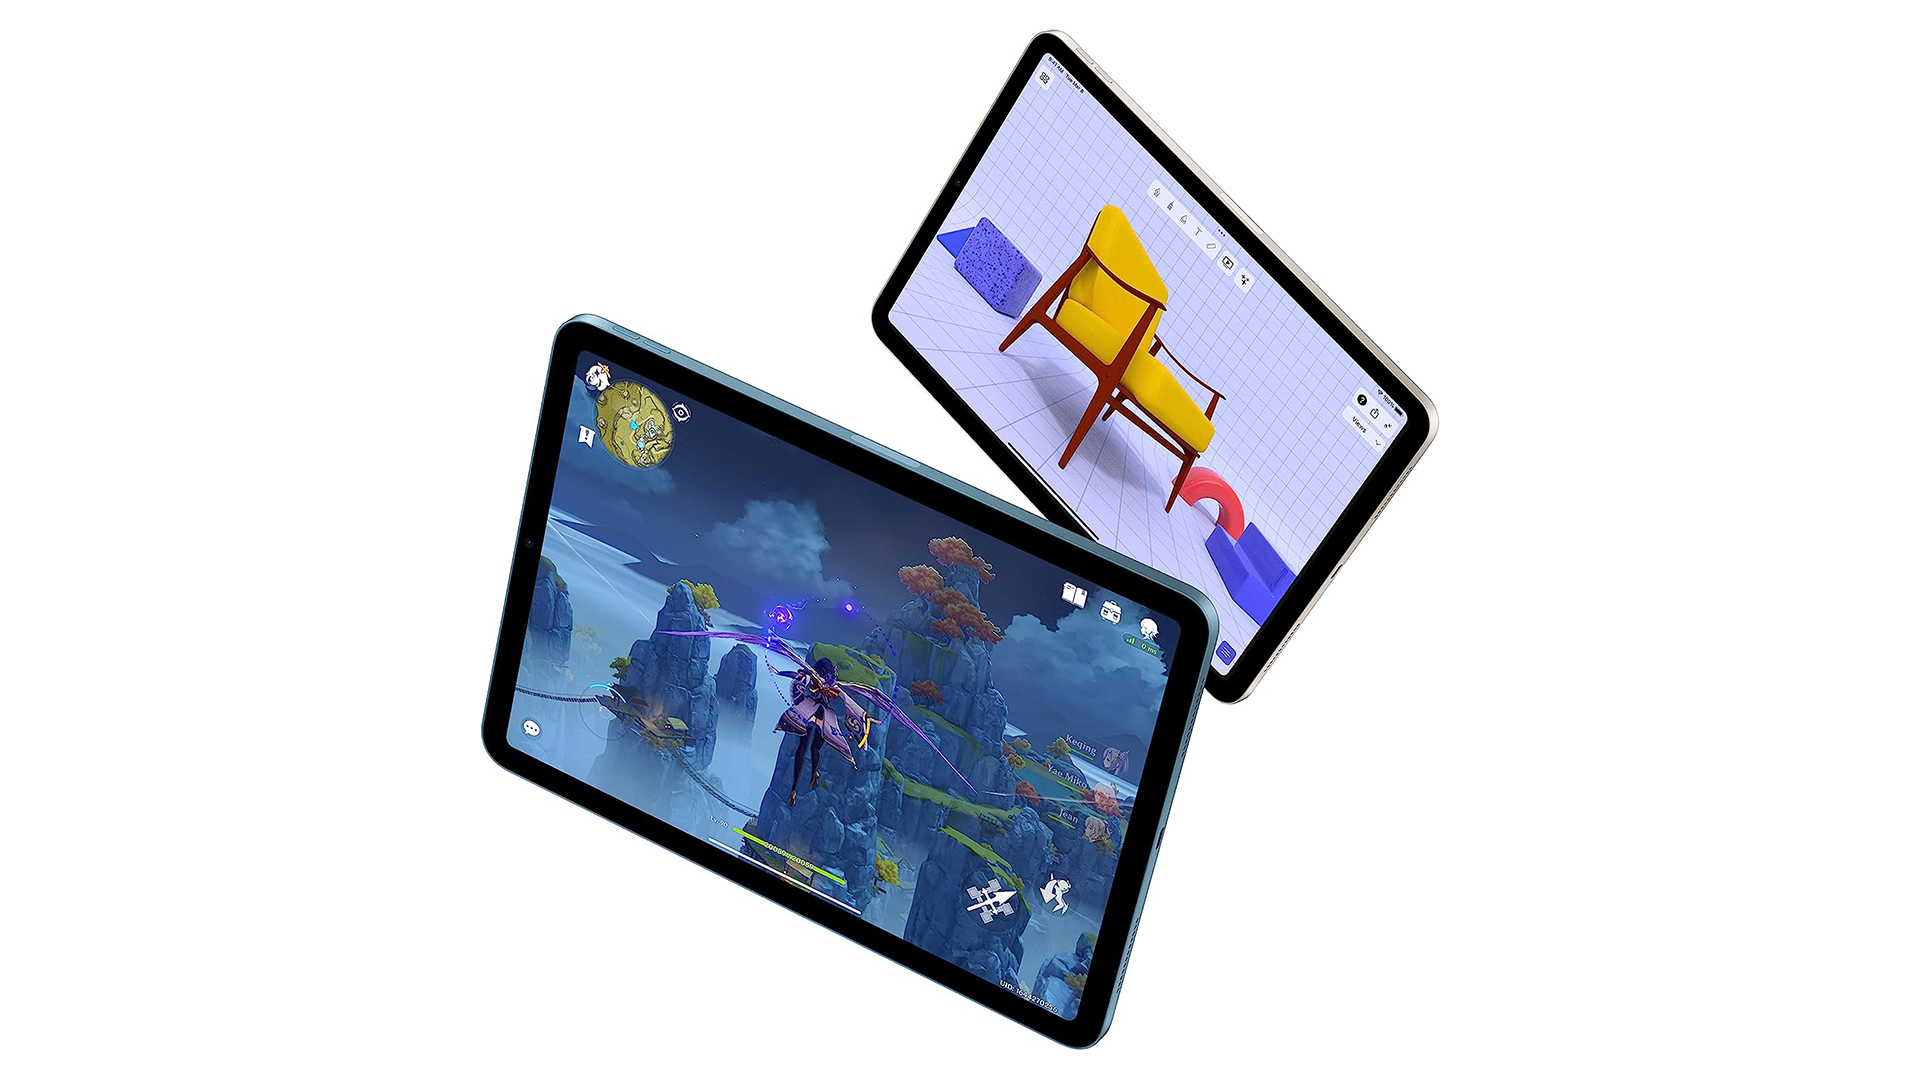 Two iPad Airs appear in mid-air, screens showing some 3D renders.